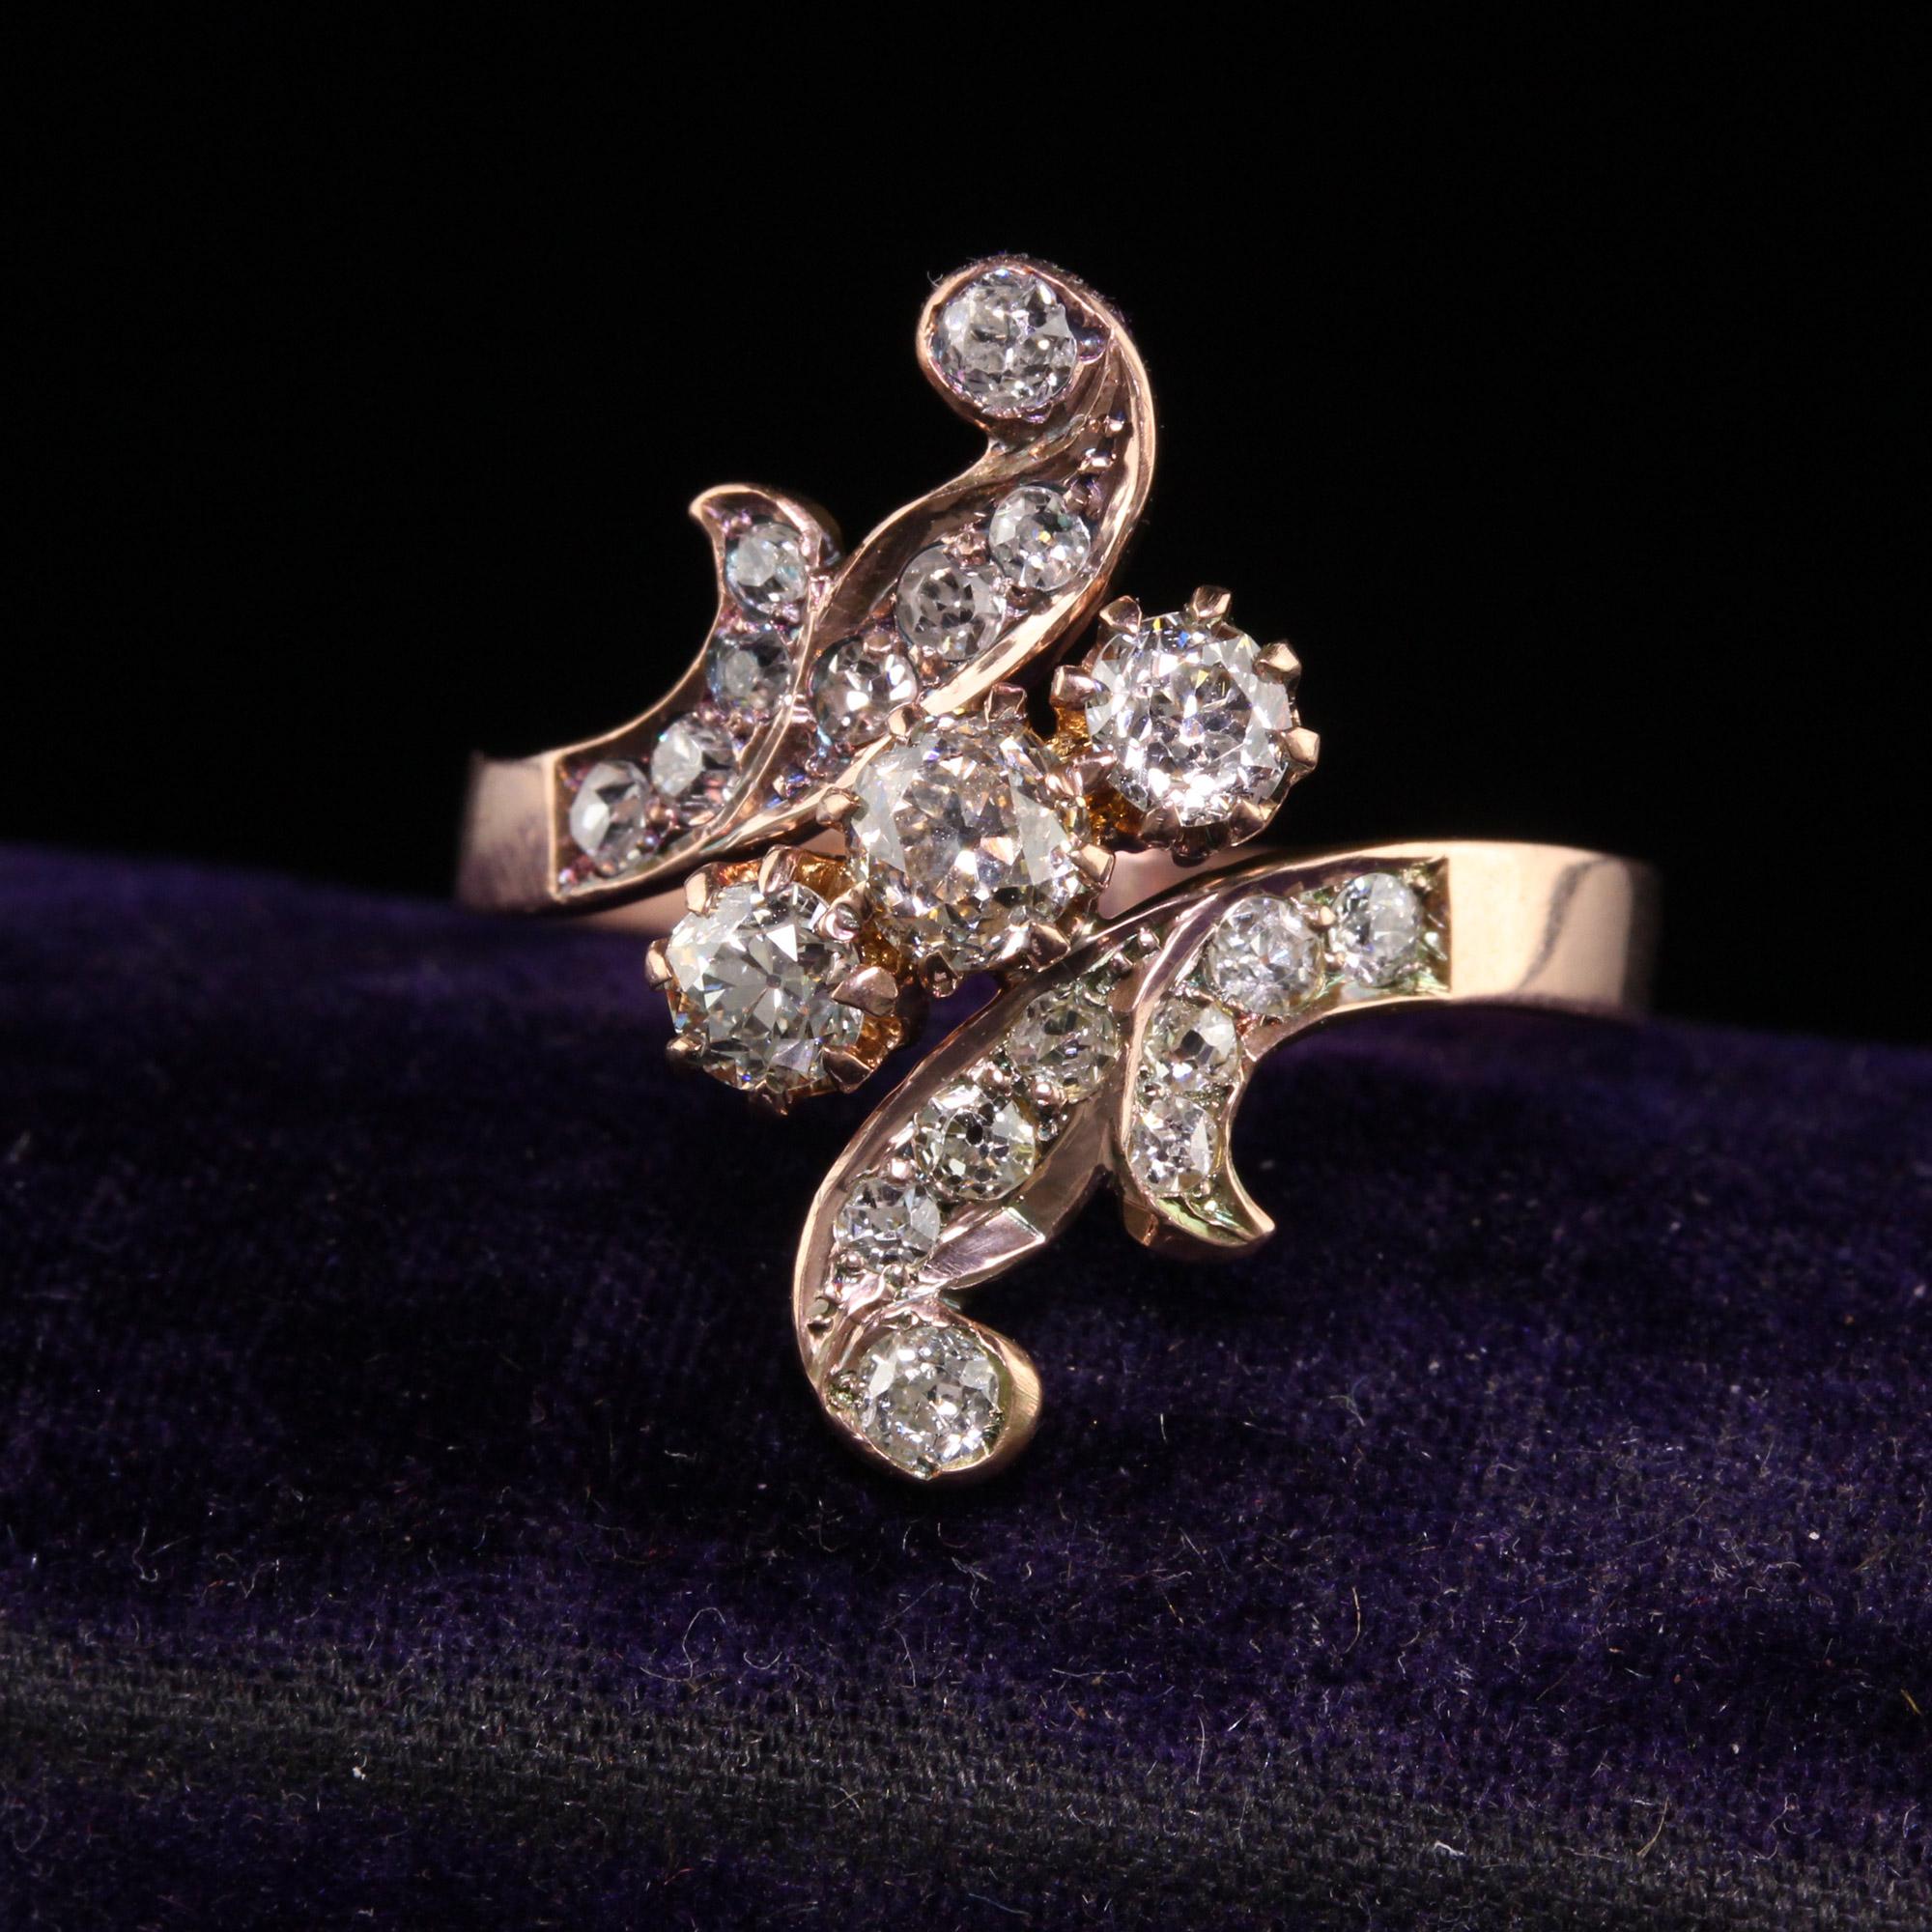 Beautiful Antique Victorian 18K Rose Gold Old Mine Cut Diamond Floral Ring. This beautiful ring is crafted in 18k rose gold. This beautiful ring has old mine cut diamonds set in the floral pattern. The ring is in great condition and sits low on the